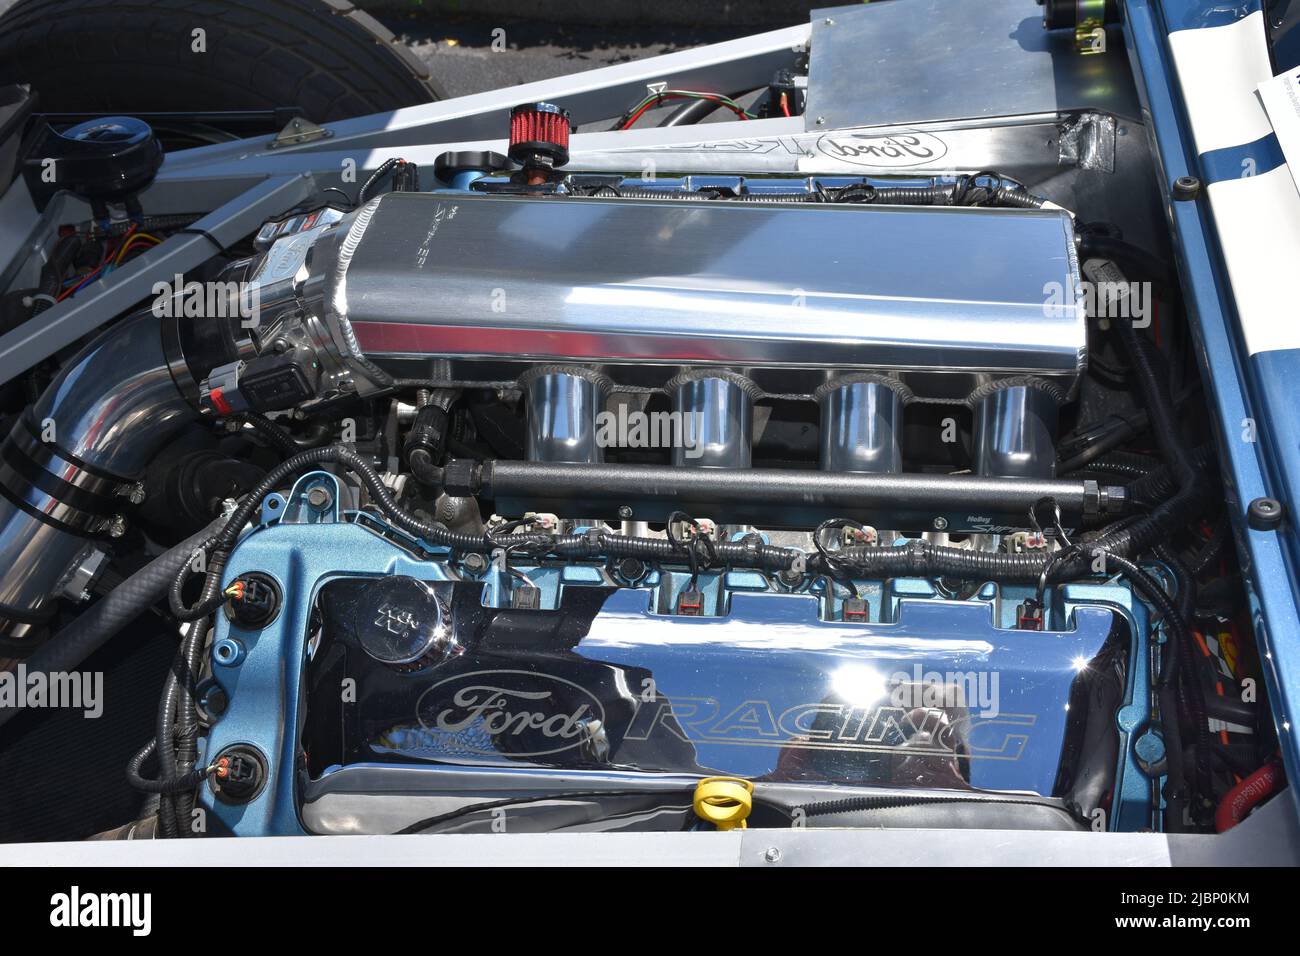 A Ford Racing Engine on display at a car show. Stock Photo